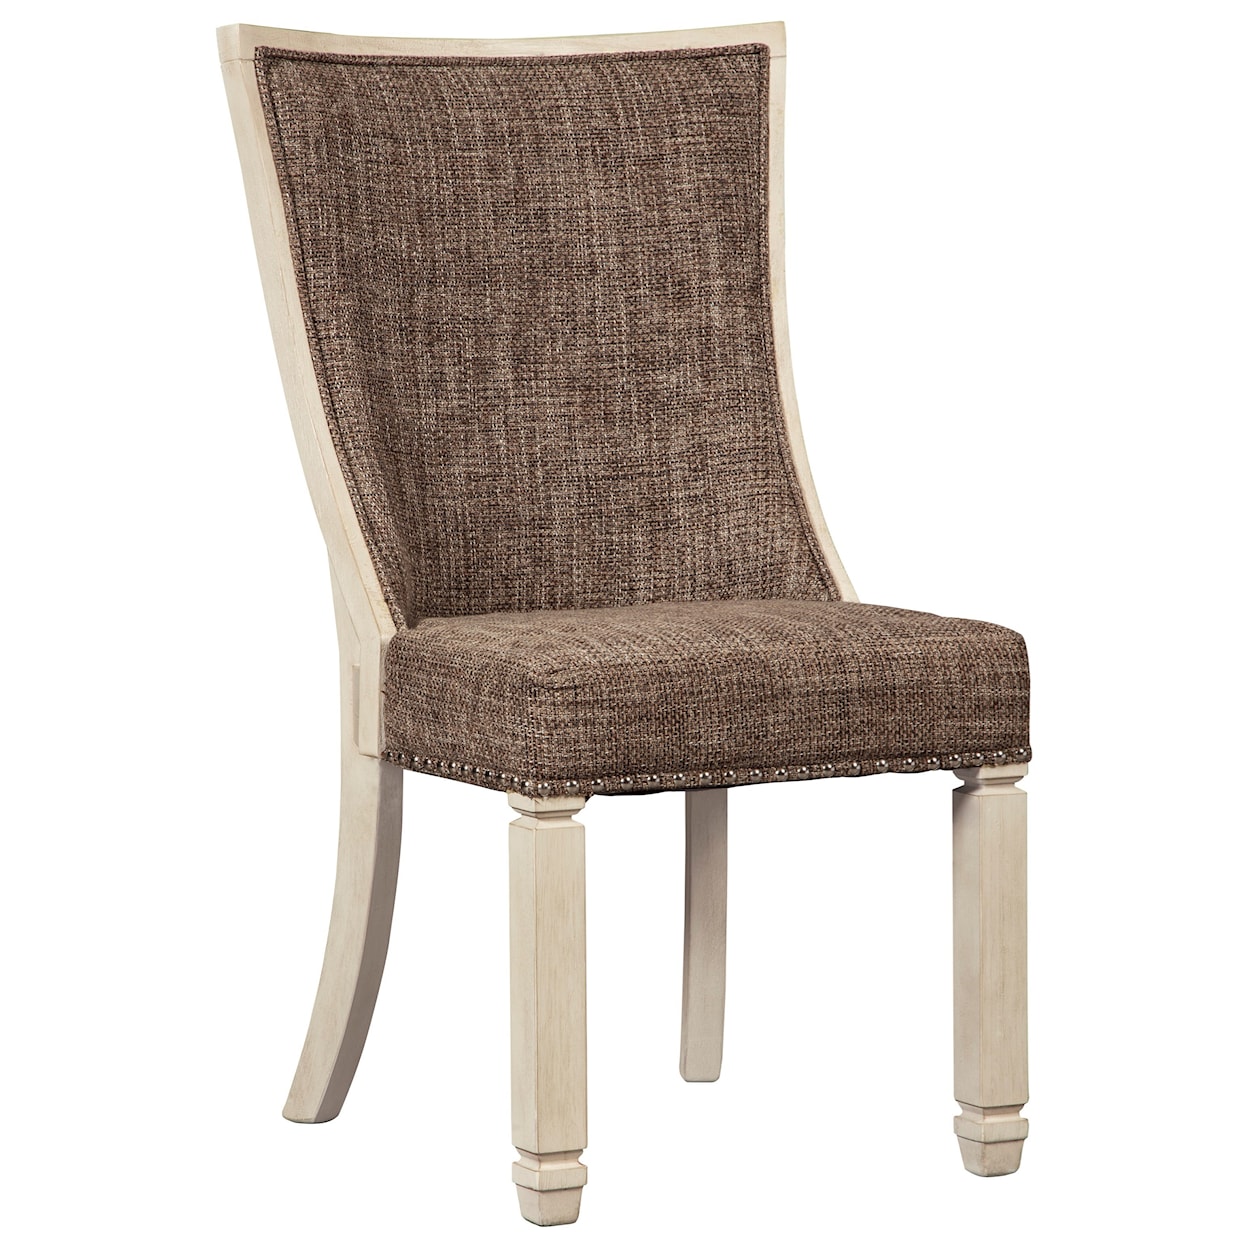 Signature Design by Ashley Bolanburg Upholstered Side Chair